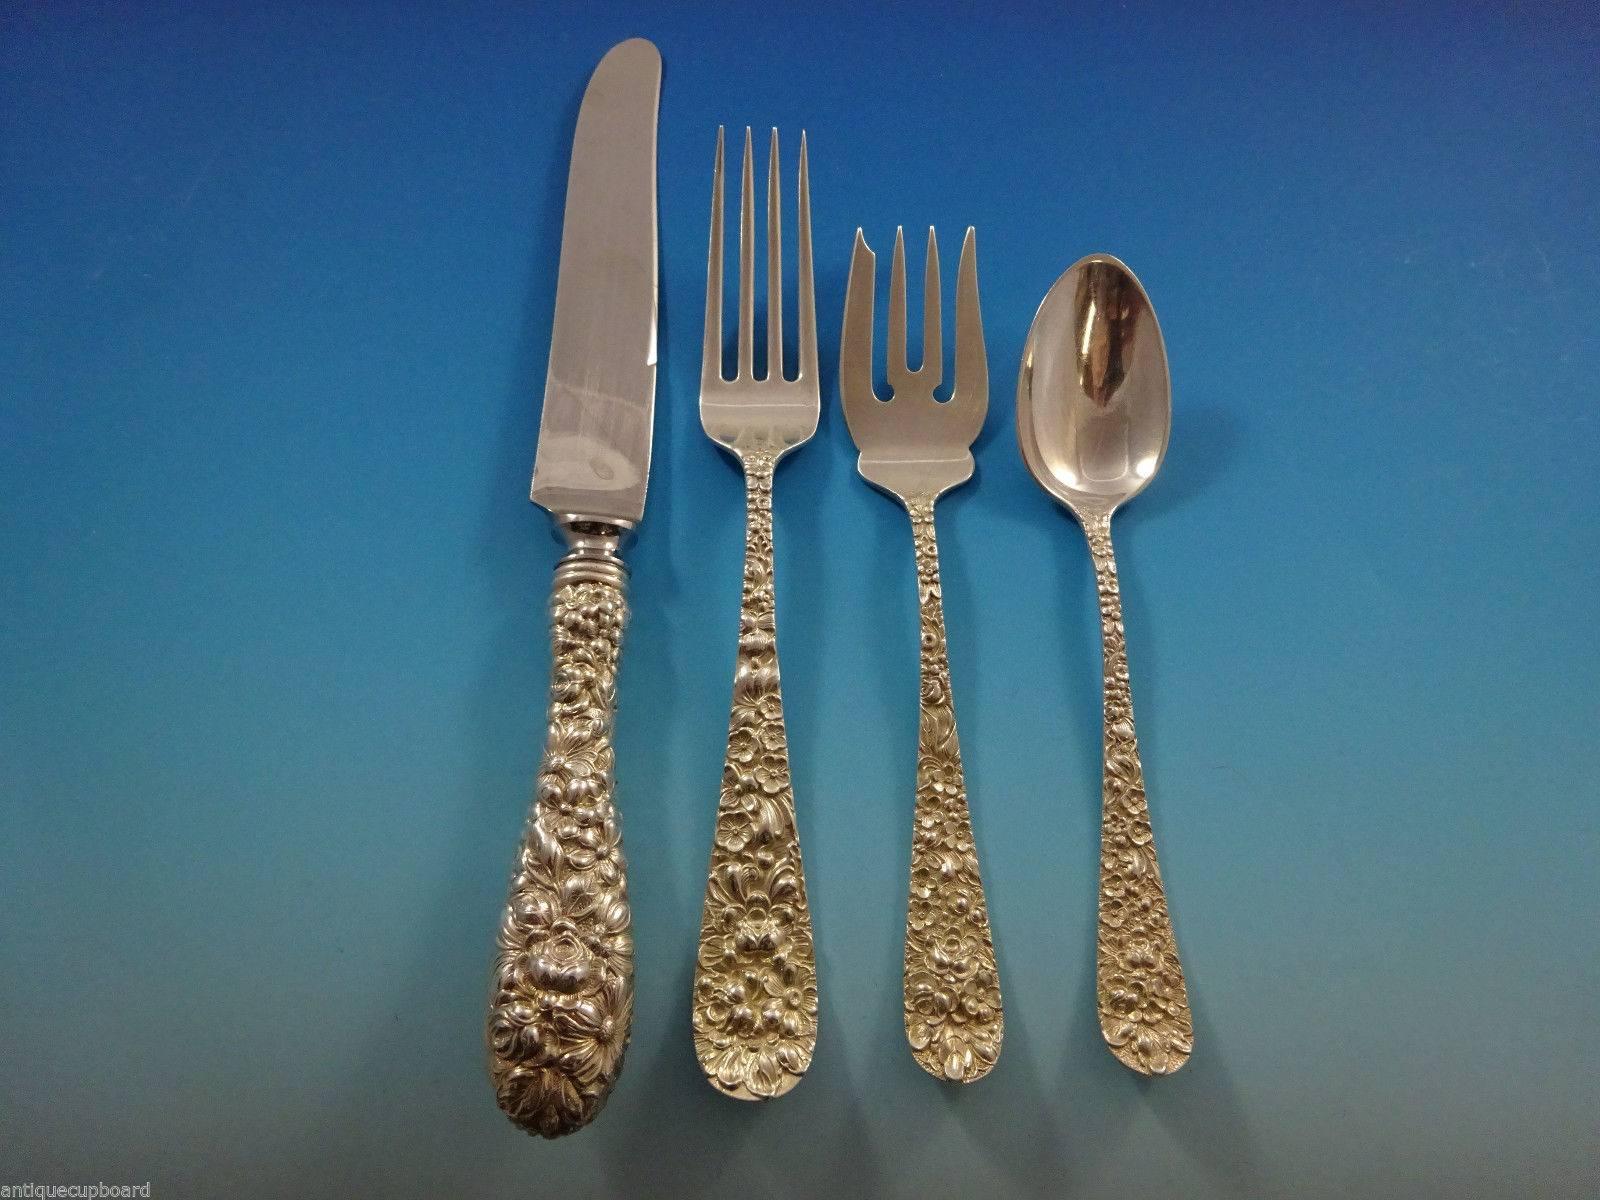 Beautiful Rose by Stieff sterling silver flatware set of 48 pieces. This set includes:

12 knives, 9